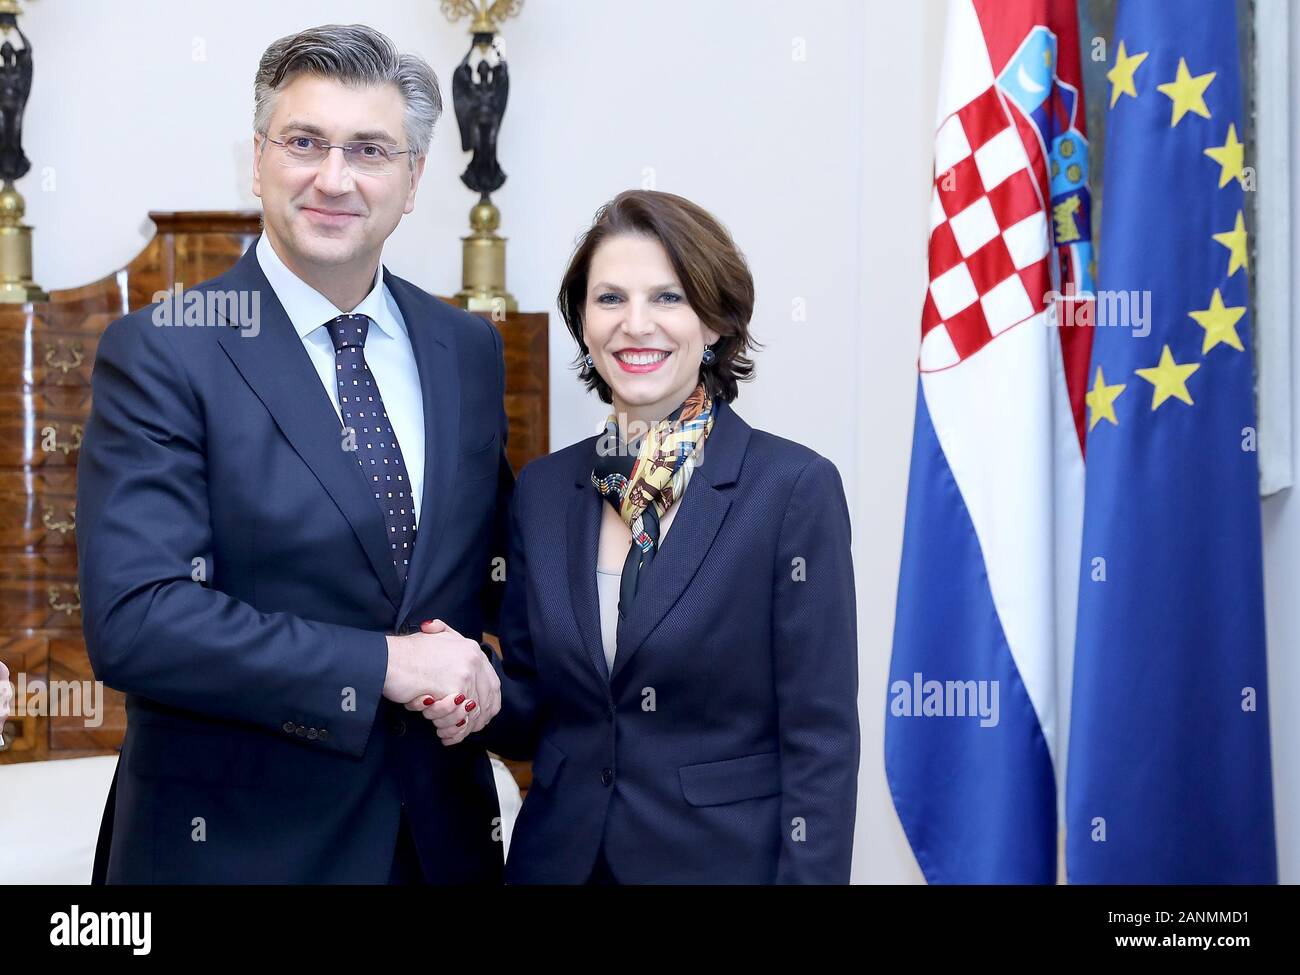 (200118) -- BEIJING, Jan. 18, 2020 (Xinhua) -- Croatian Prime Minister Andrej Plenkovic (L) shakes hands with Austrian Federal Minister for European Affairs Karoline Edtstadler during their meeting in Zagreb, Croatia, Jan. 17, 2020. Croatia and Austria will continue to push for a decision to open accession negotiations with Albania and North Macedonia at European Council level in March, Plenkovic and Edtstadler said here at a meeting on Friday. (Patrik Macek/Pixsell via Xinhua) Stock Photo